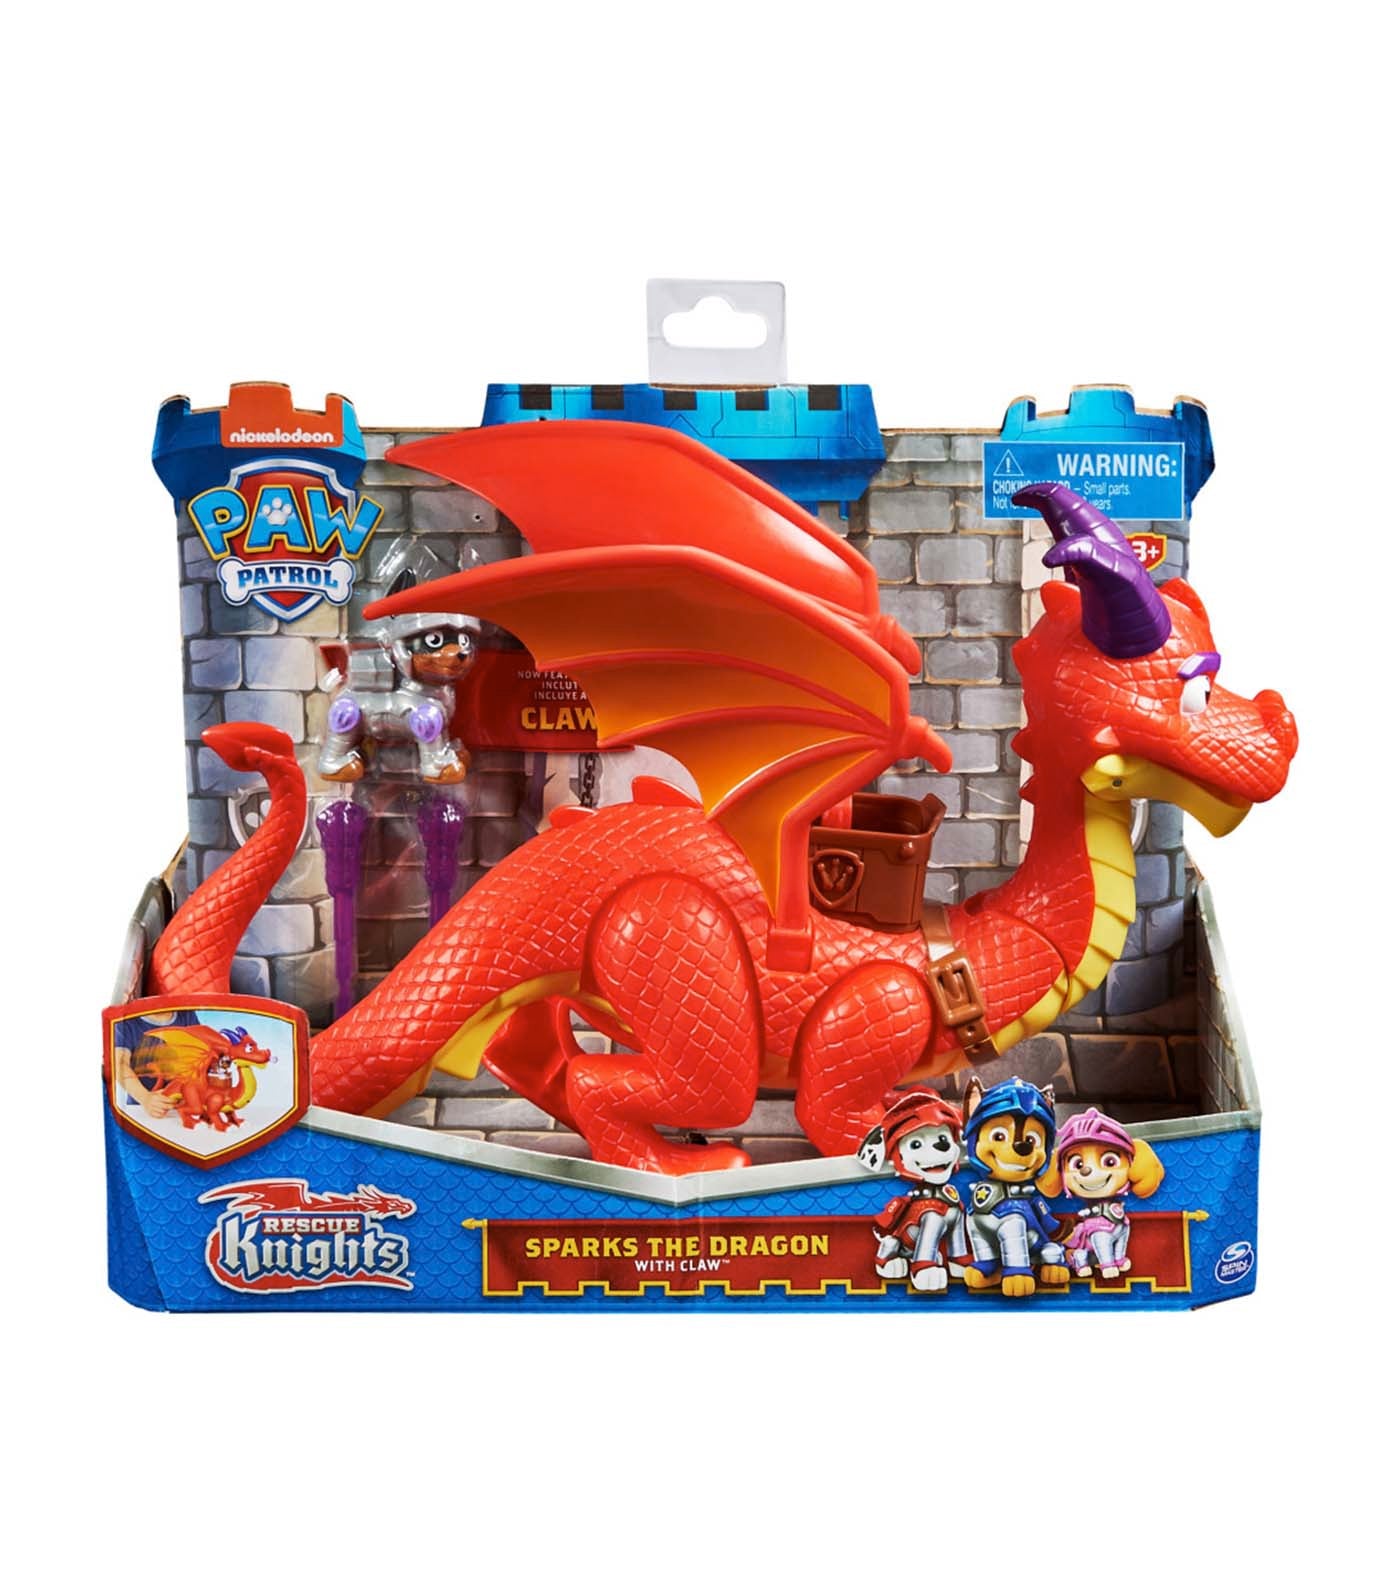 Rescue Knight - Sparks the Dragon and Claw Figure Set